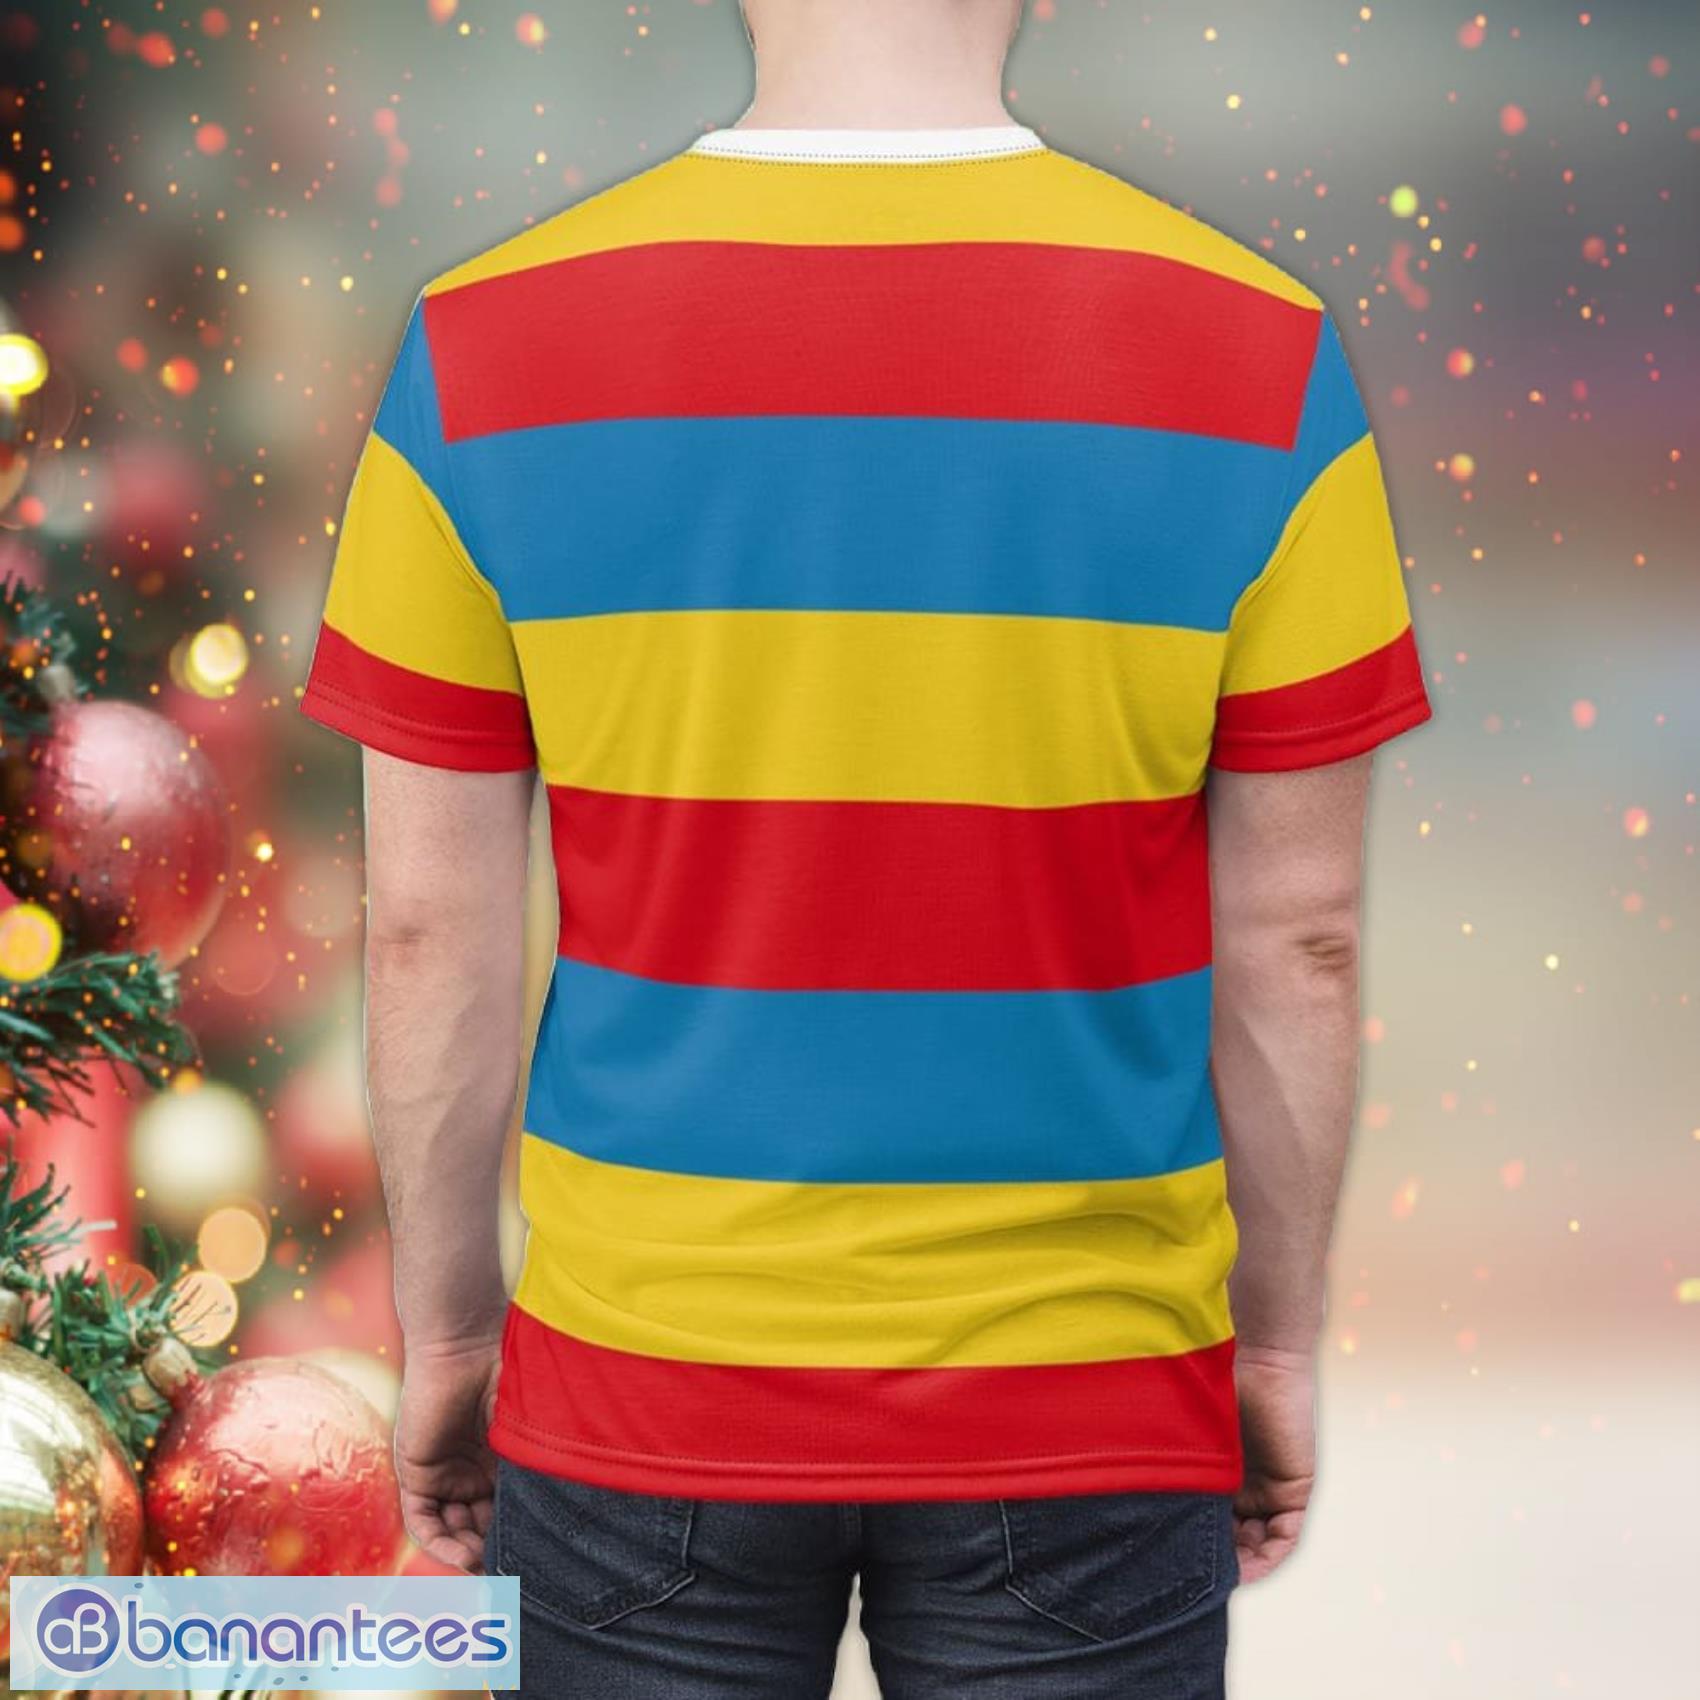 Red And Yellow Striped Shirt